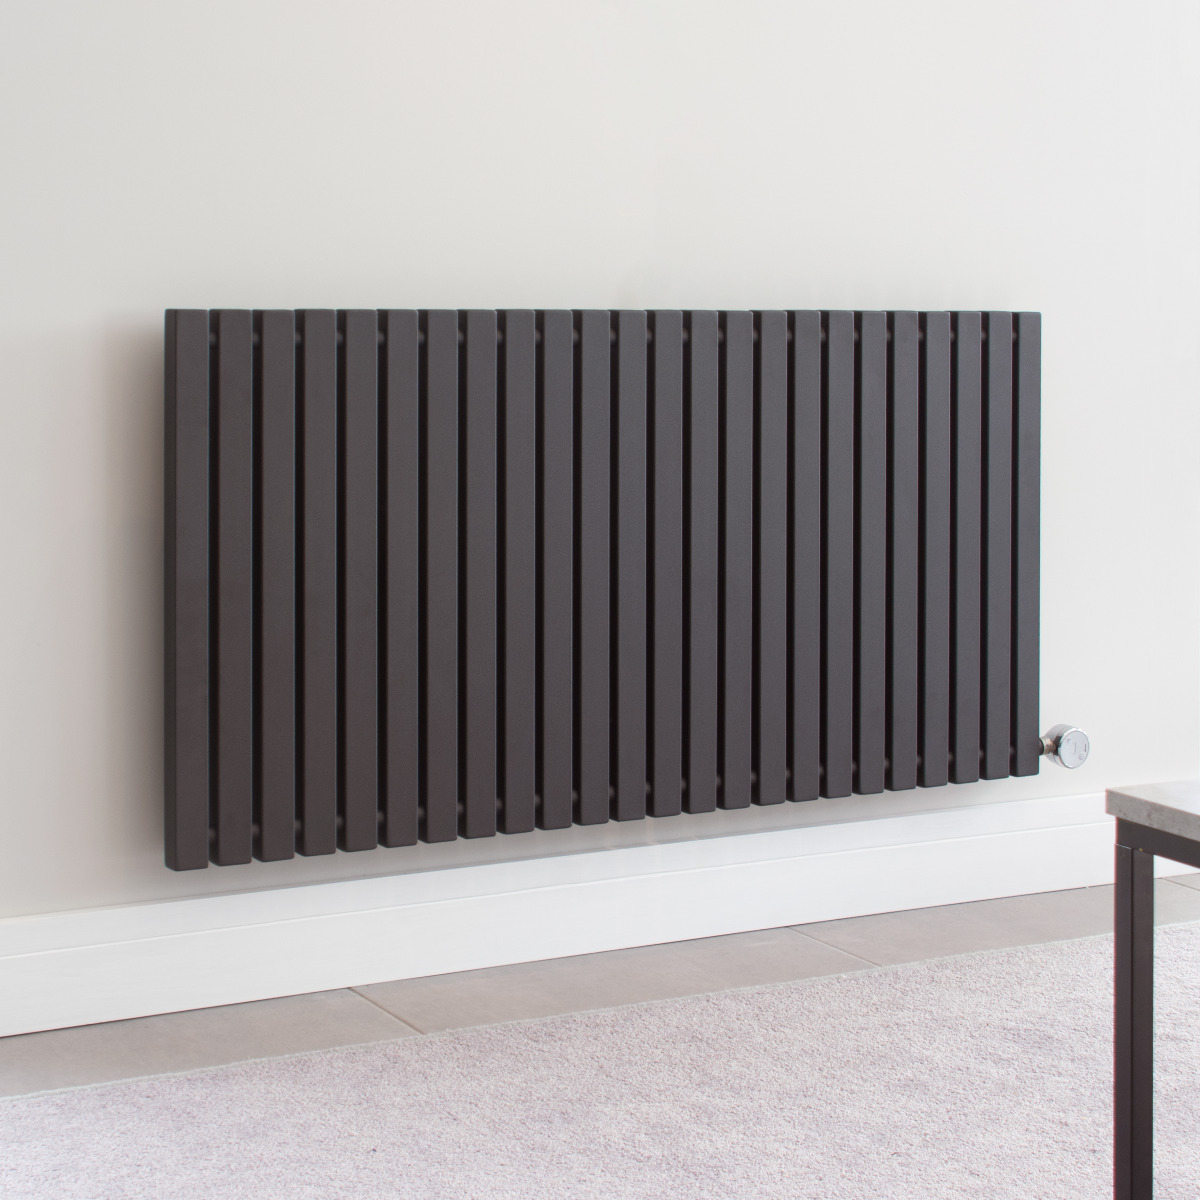 Ecostrad Adesso electric radiator installed on wall